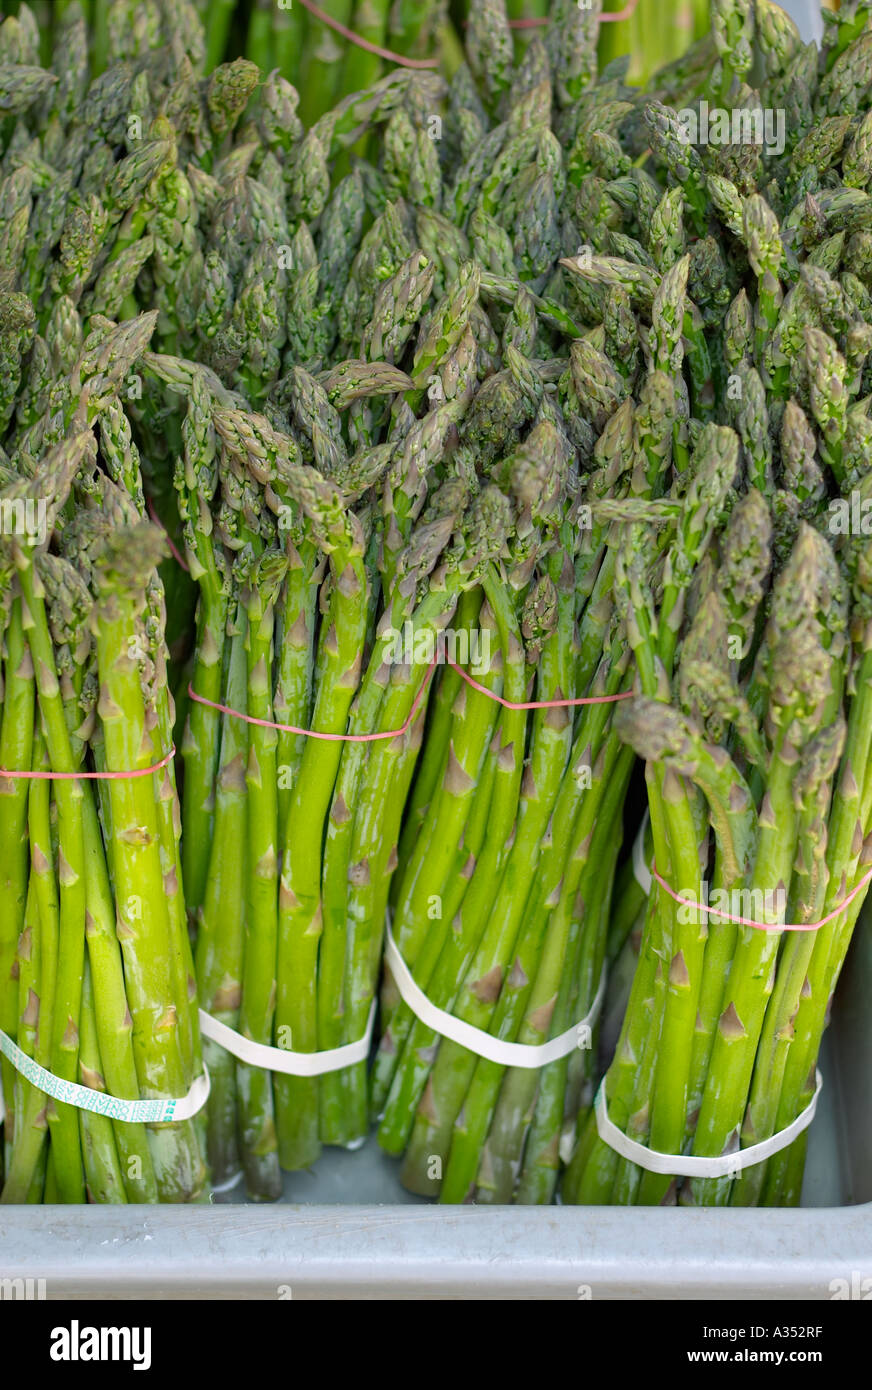 Mature fresh mustard green asparagus bunches at the supermarket. Stock Photo